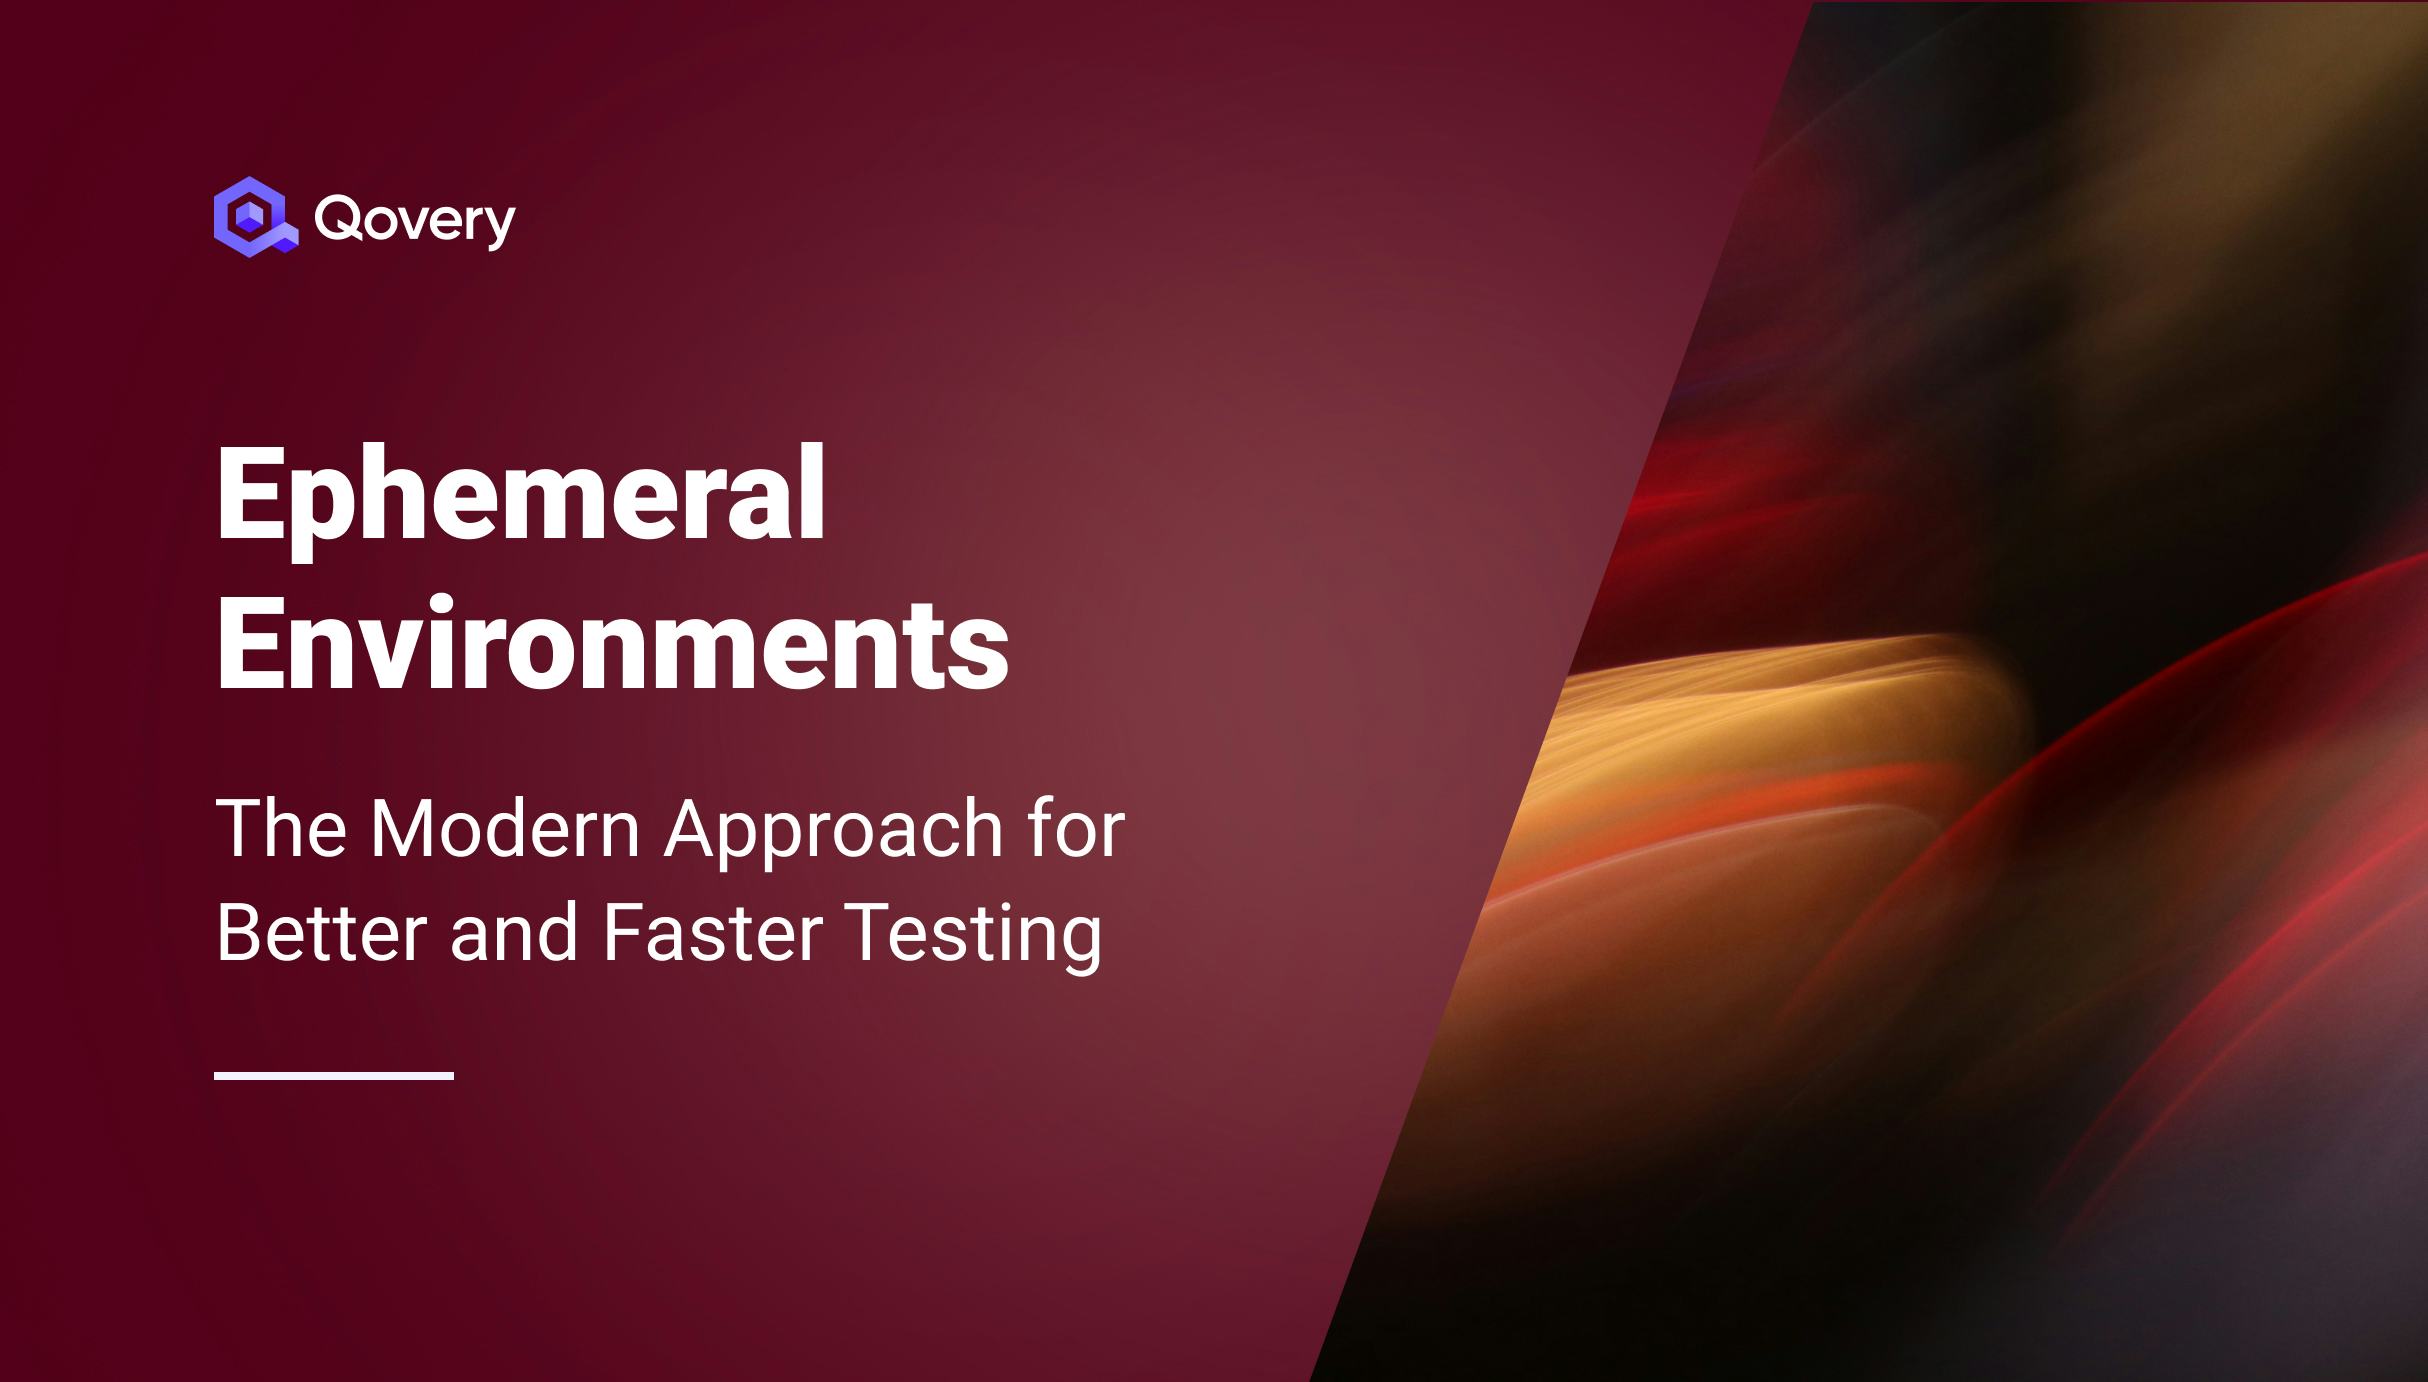 Ephemeral Environments: The Modern Approach for Better and Faster Testing - Qovery